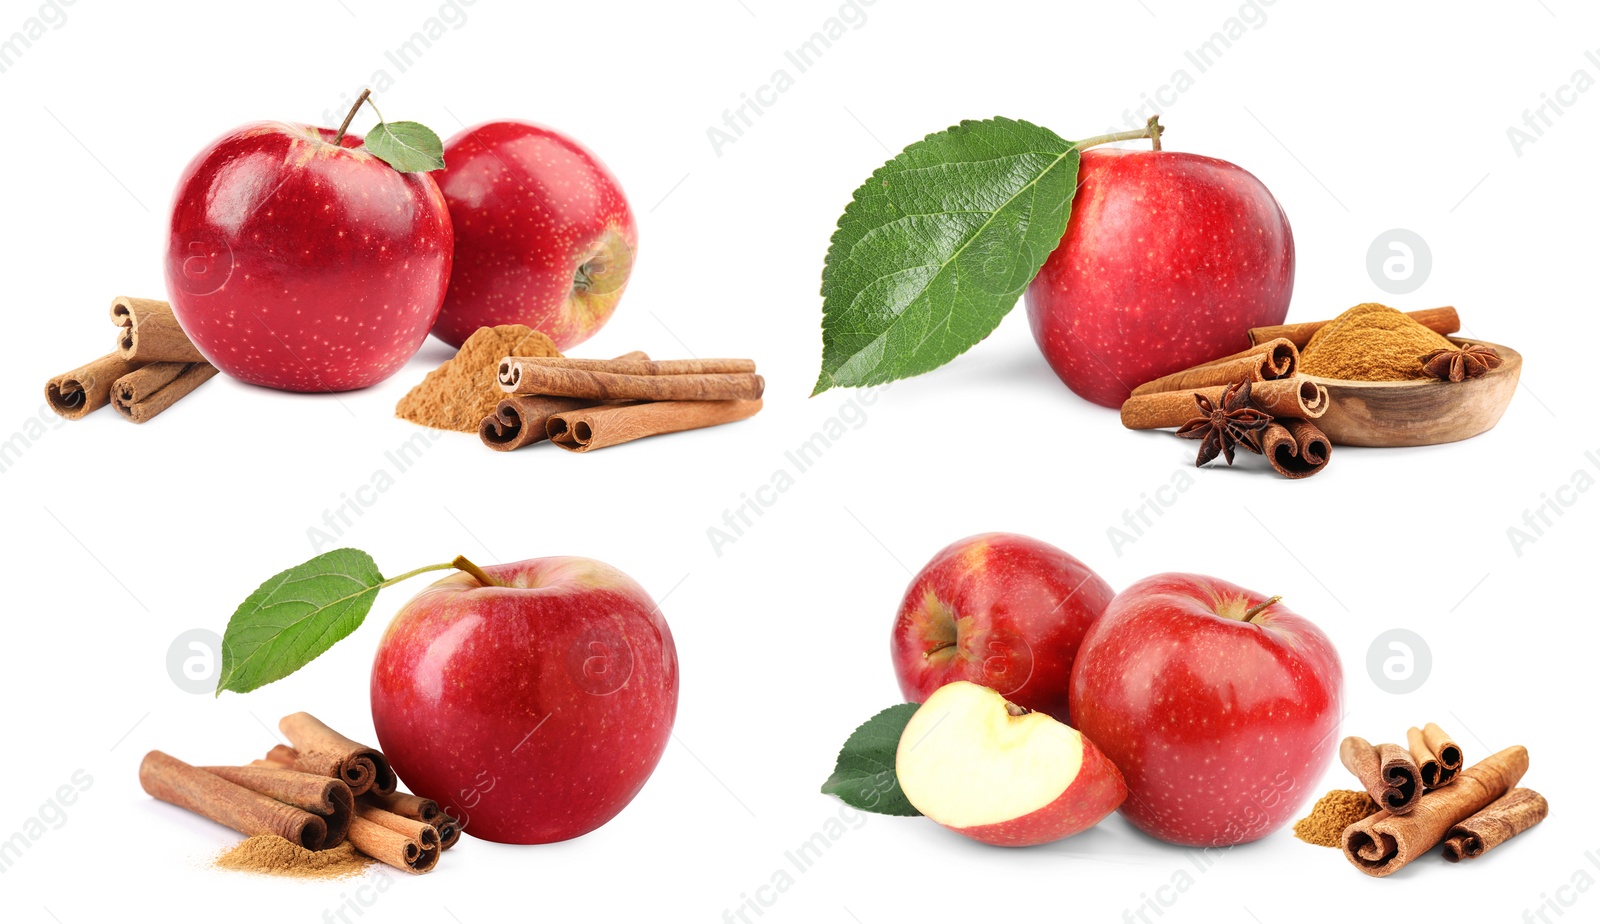 Image of Aromatic cinnamon sticks, powder and red apples isolated on white, set